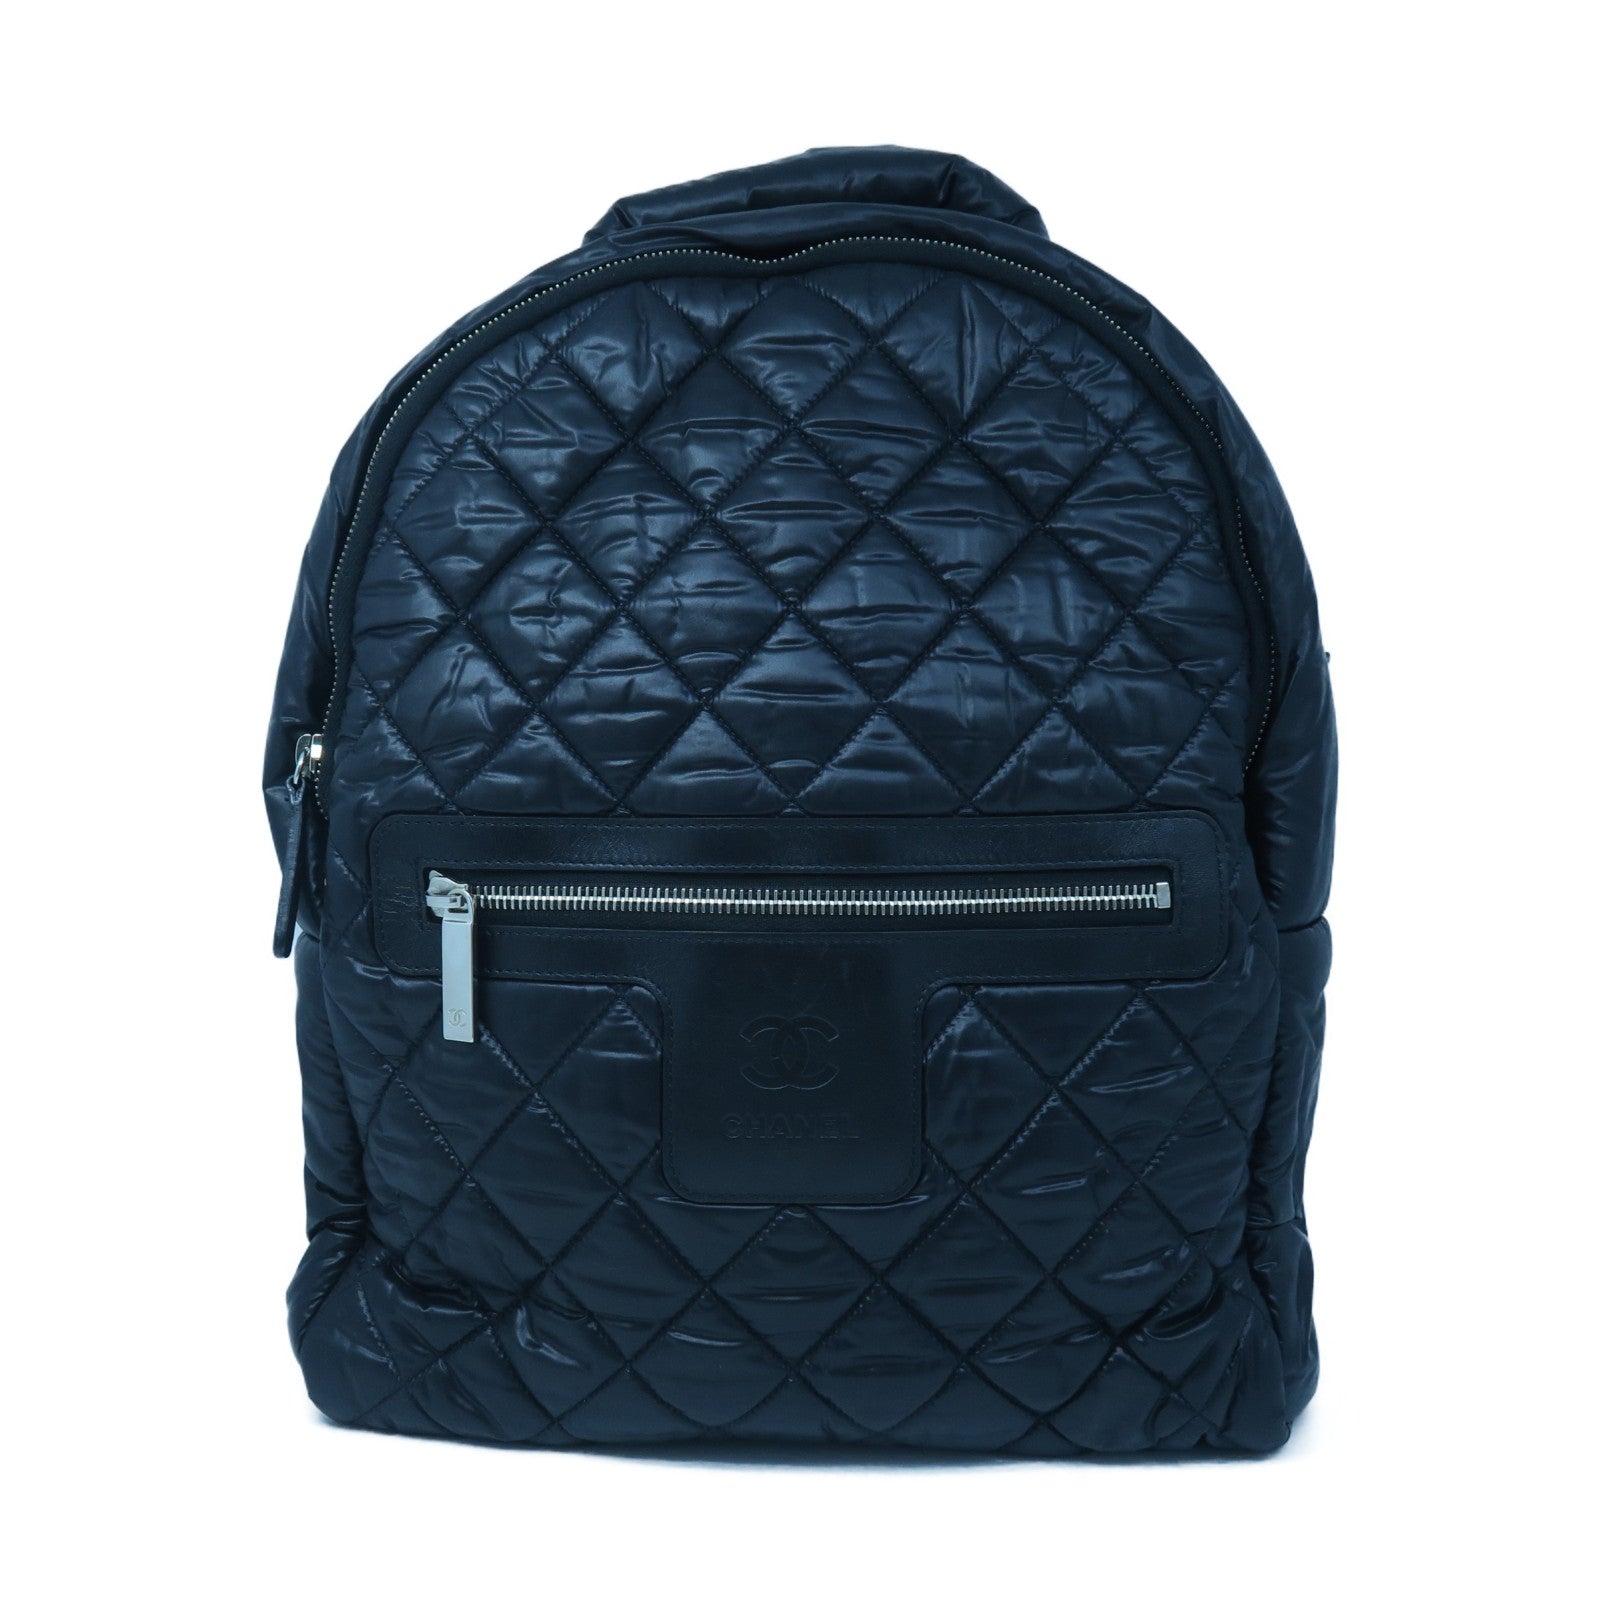 CHANEL Coco Cocoon Black Quilted Backpack